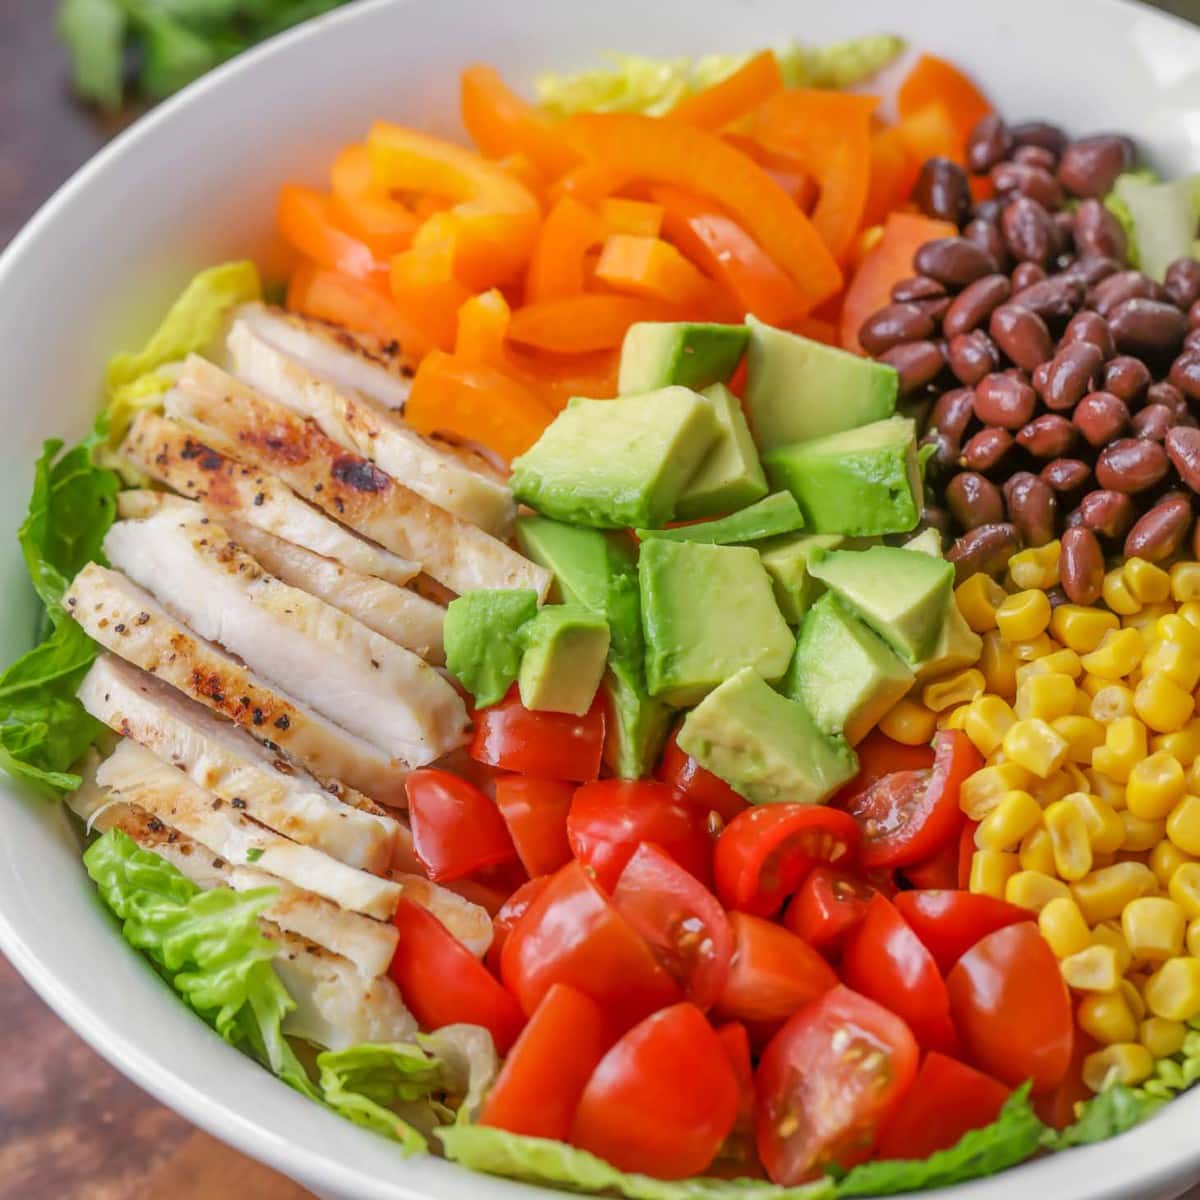 Green Salad Recipes - Southwest salad made with beans, corn, bell peppers, tomatoes, and chicken. 